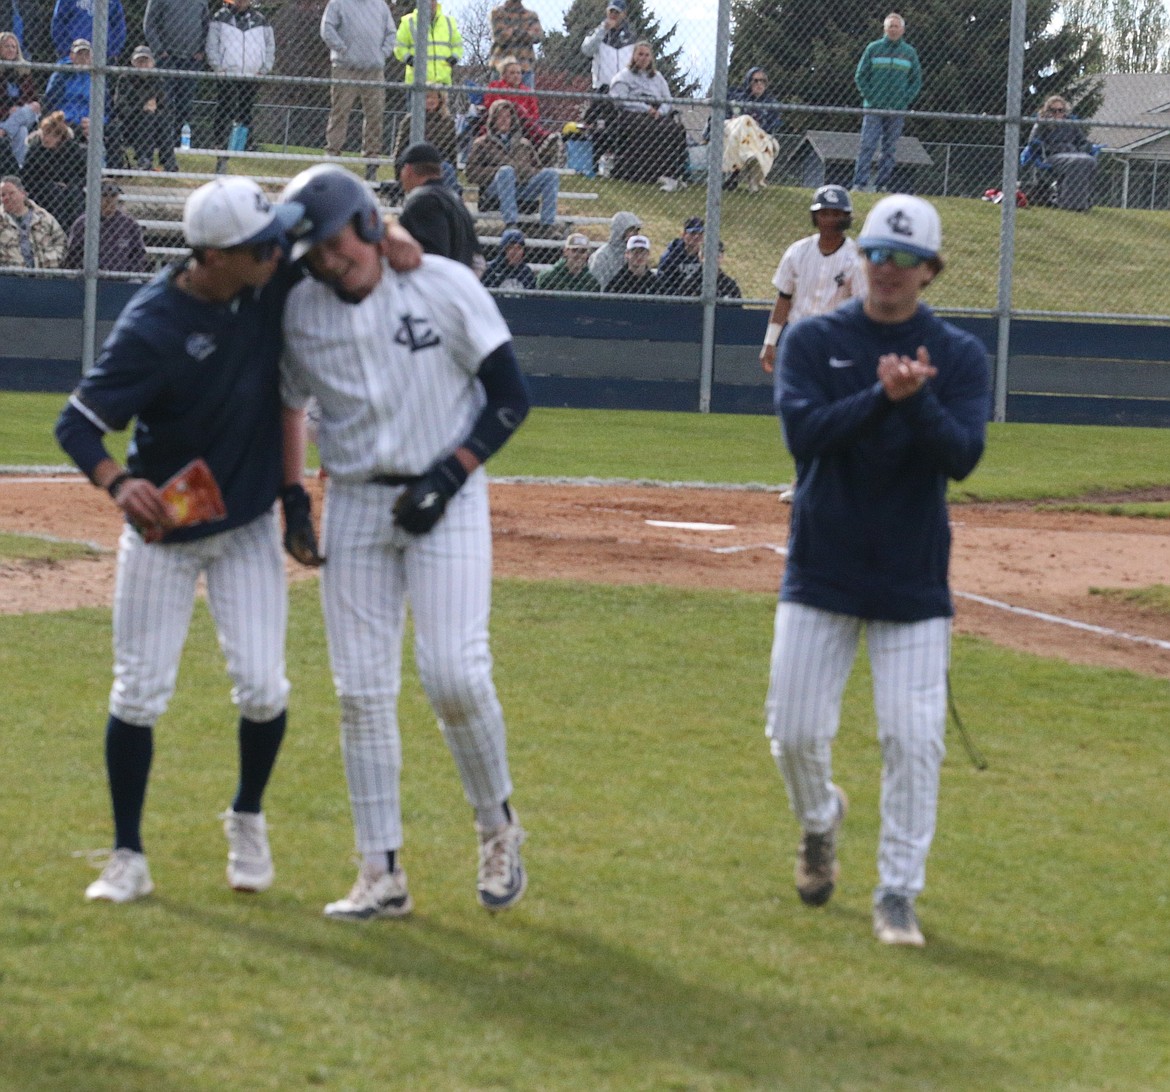 JASON ELLIOTT/Press
Lake City junior outfielder Jack Pierce hugs senior Charlie Dixon after Dixon's solo home run to give the Timberwolves a 1-0 lead in the third inning the 5A Region 1 baseball championship game at Lake City High on Tuesday. Also pictured is AJ Currie.